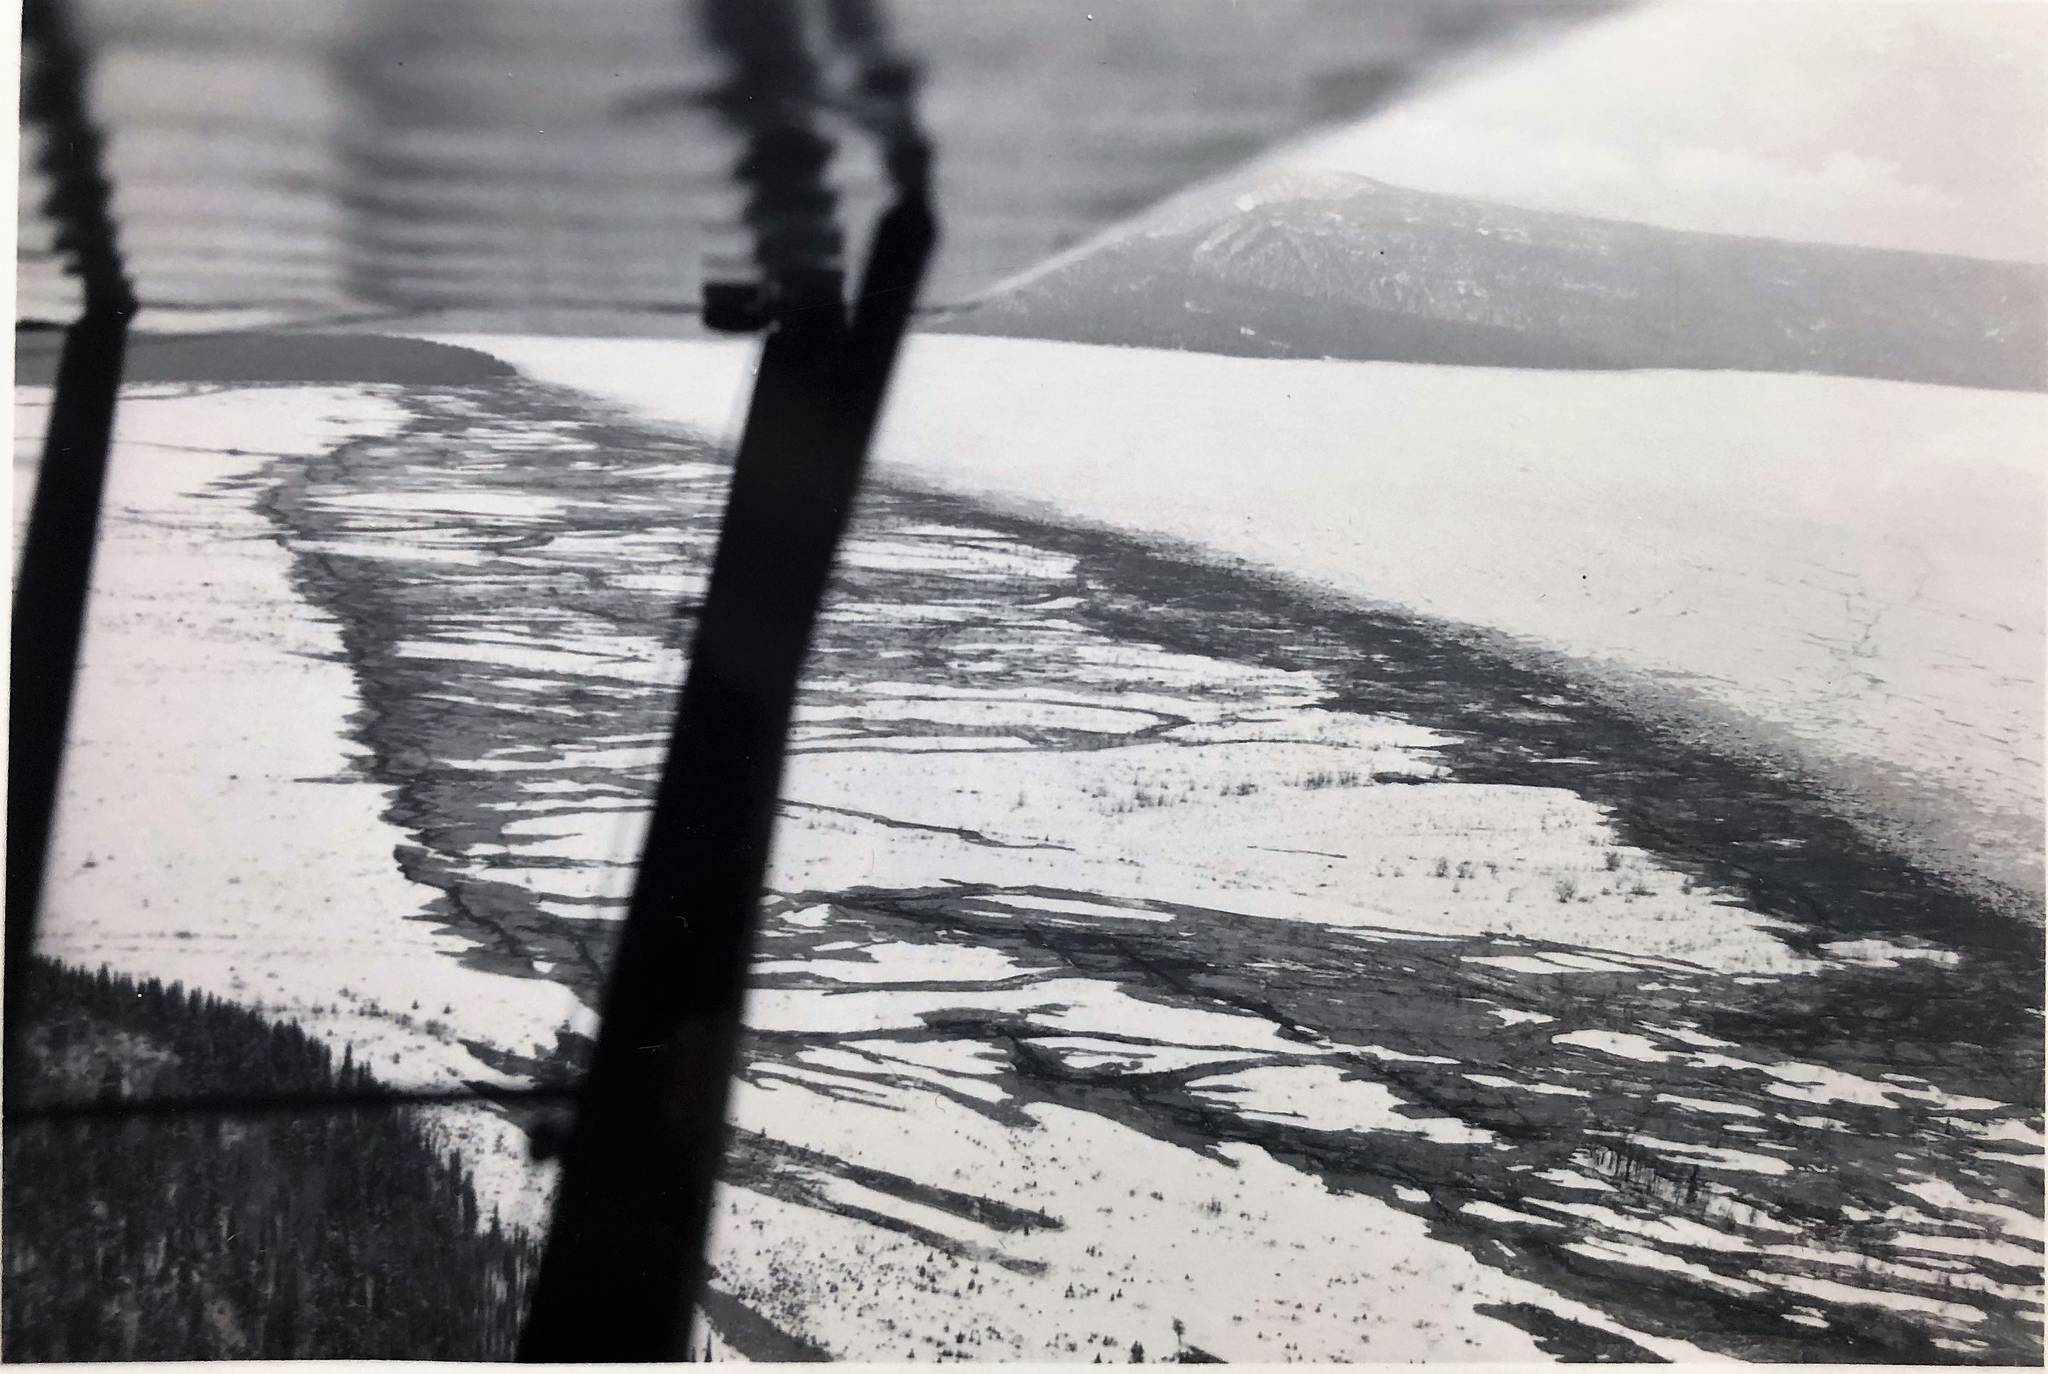 Looking south over the outwash delta at the head of Tustumena Lake showing where water and sand erupted from the ground and fractured the ice 54 years ago. Photograph taken shortly after the March 27, 1964 earthquake by Ave Thayer, Kenai National Moose Range.